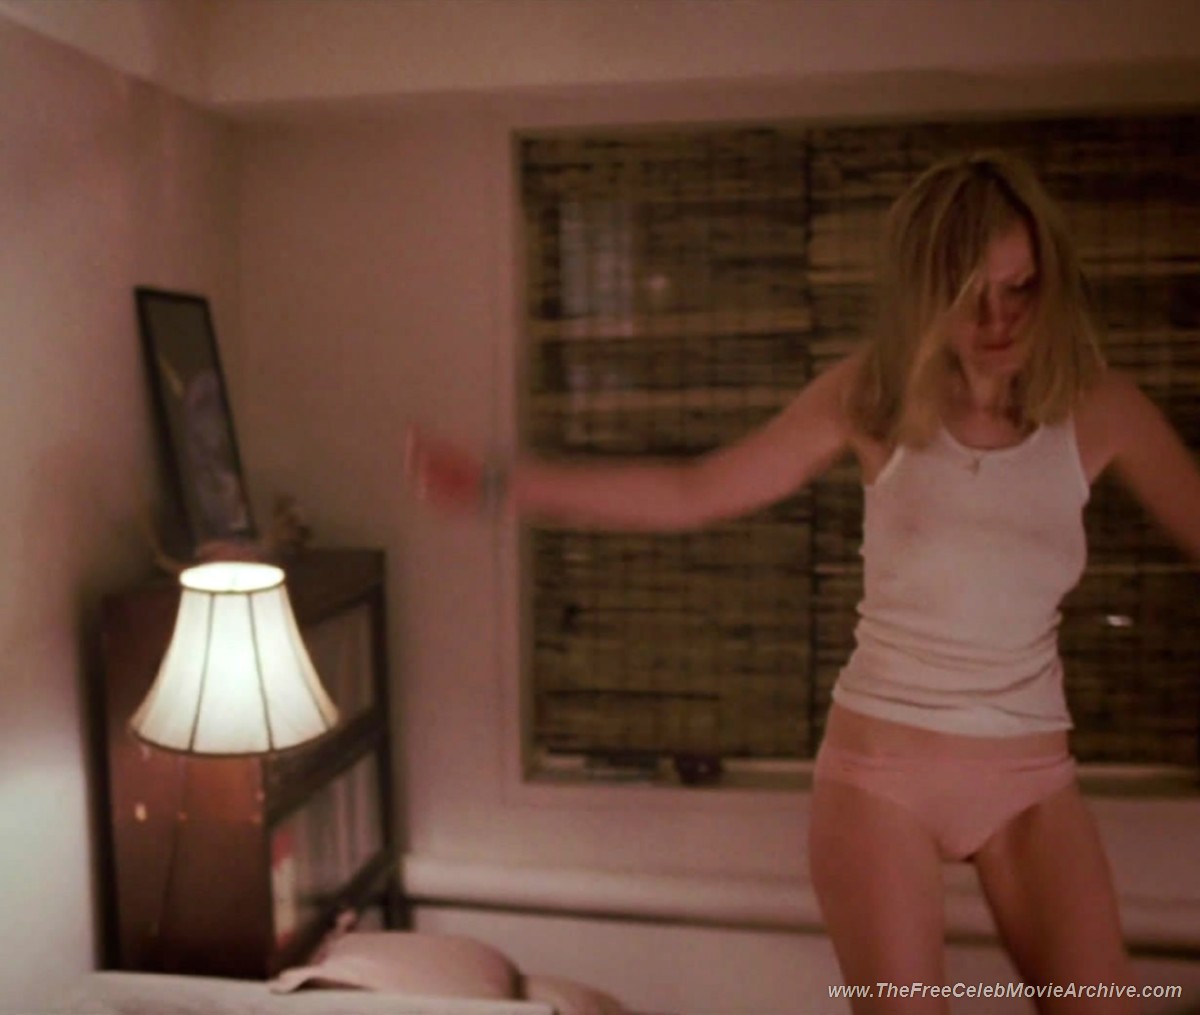 Actress Kirsten Dunst paparazzi topless shots and nude movie scenes Mr.Skin FREE ...